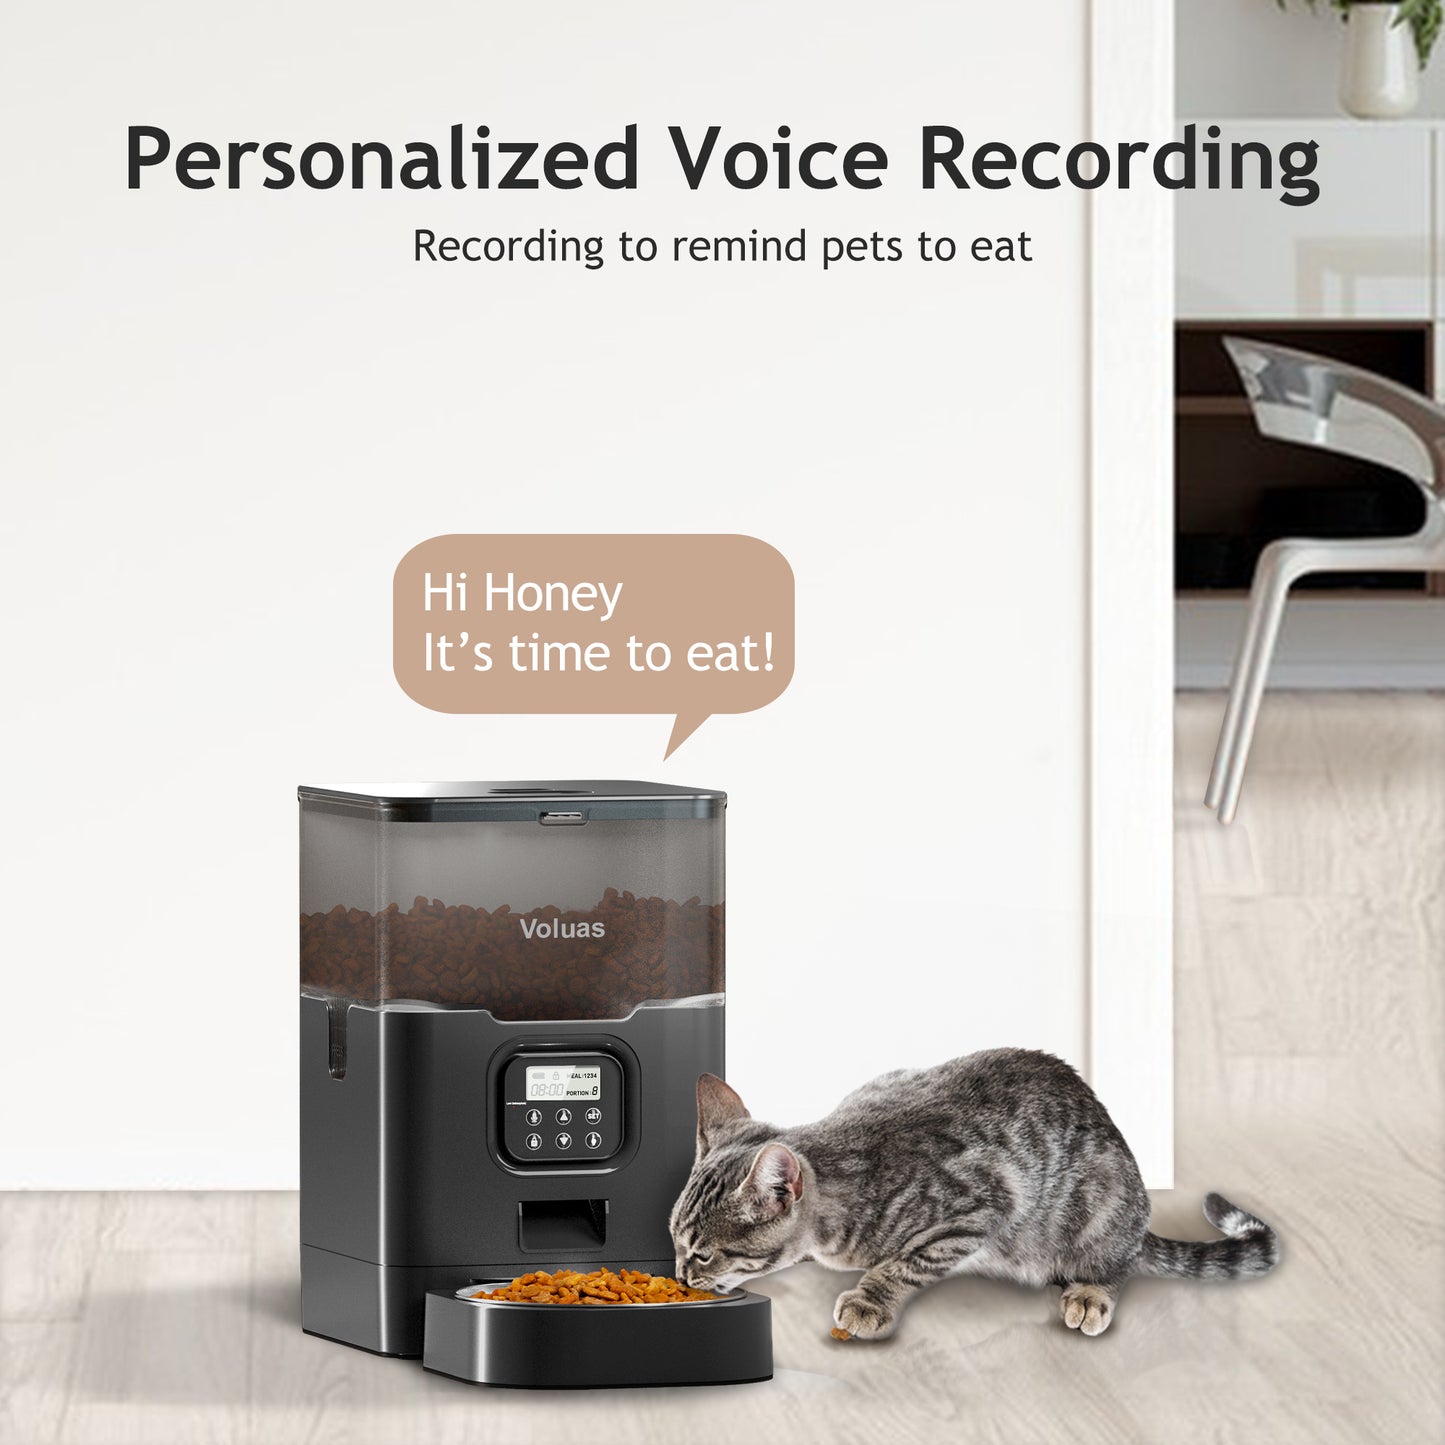 VOLUAS Cat Dry Food Dispenser with Timer, Automatic Cat Feeders with Desiccant Bag, Programmable Portion Size Control 4 Meals Per Day, 10s Voice Recorder